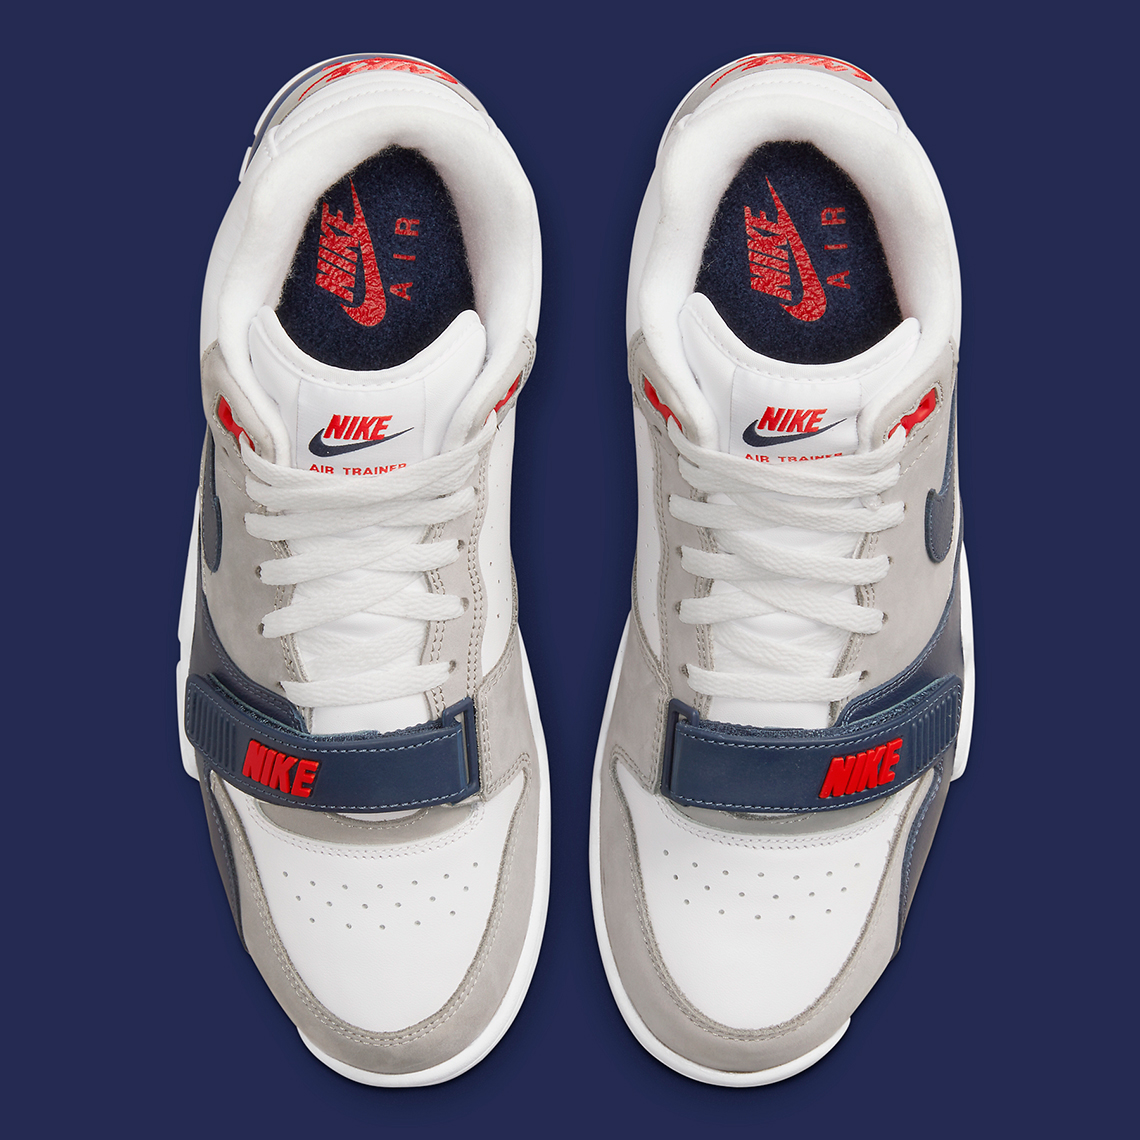 Nike Womens Shoes Clearance White Grey Navy Red Dm0521 101 1